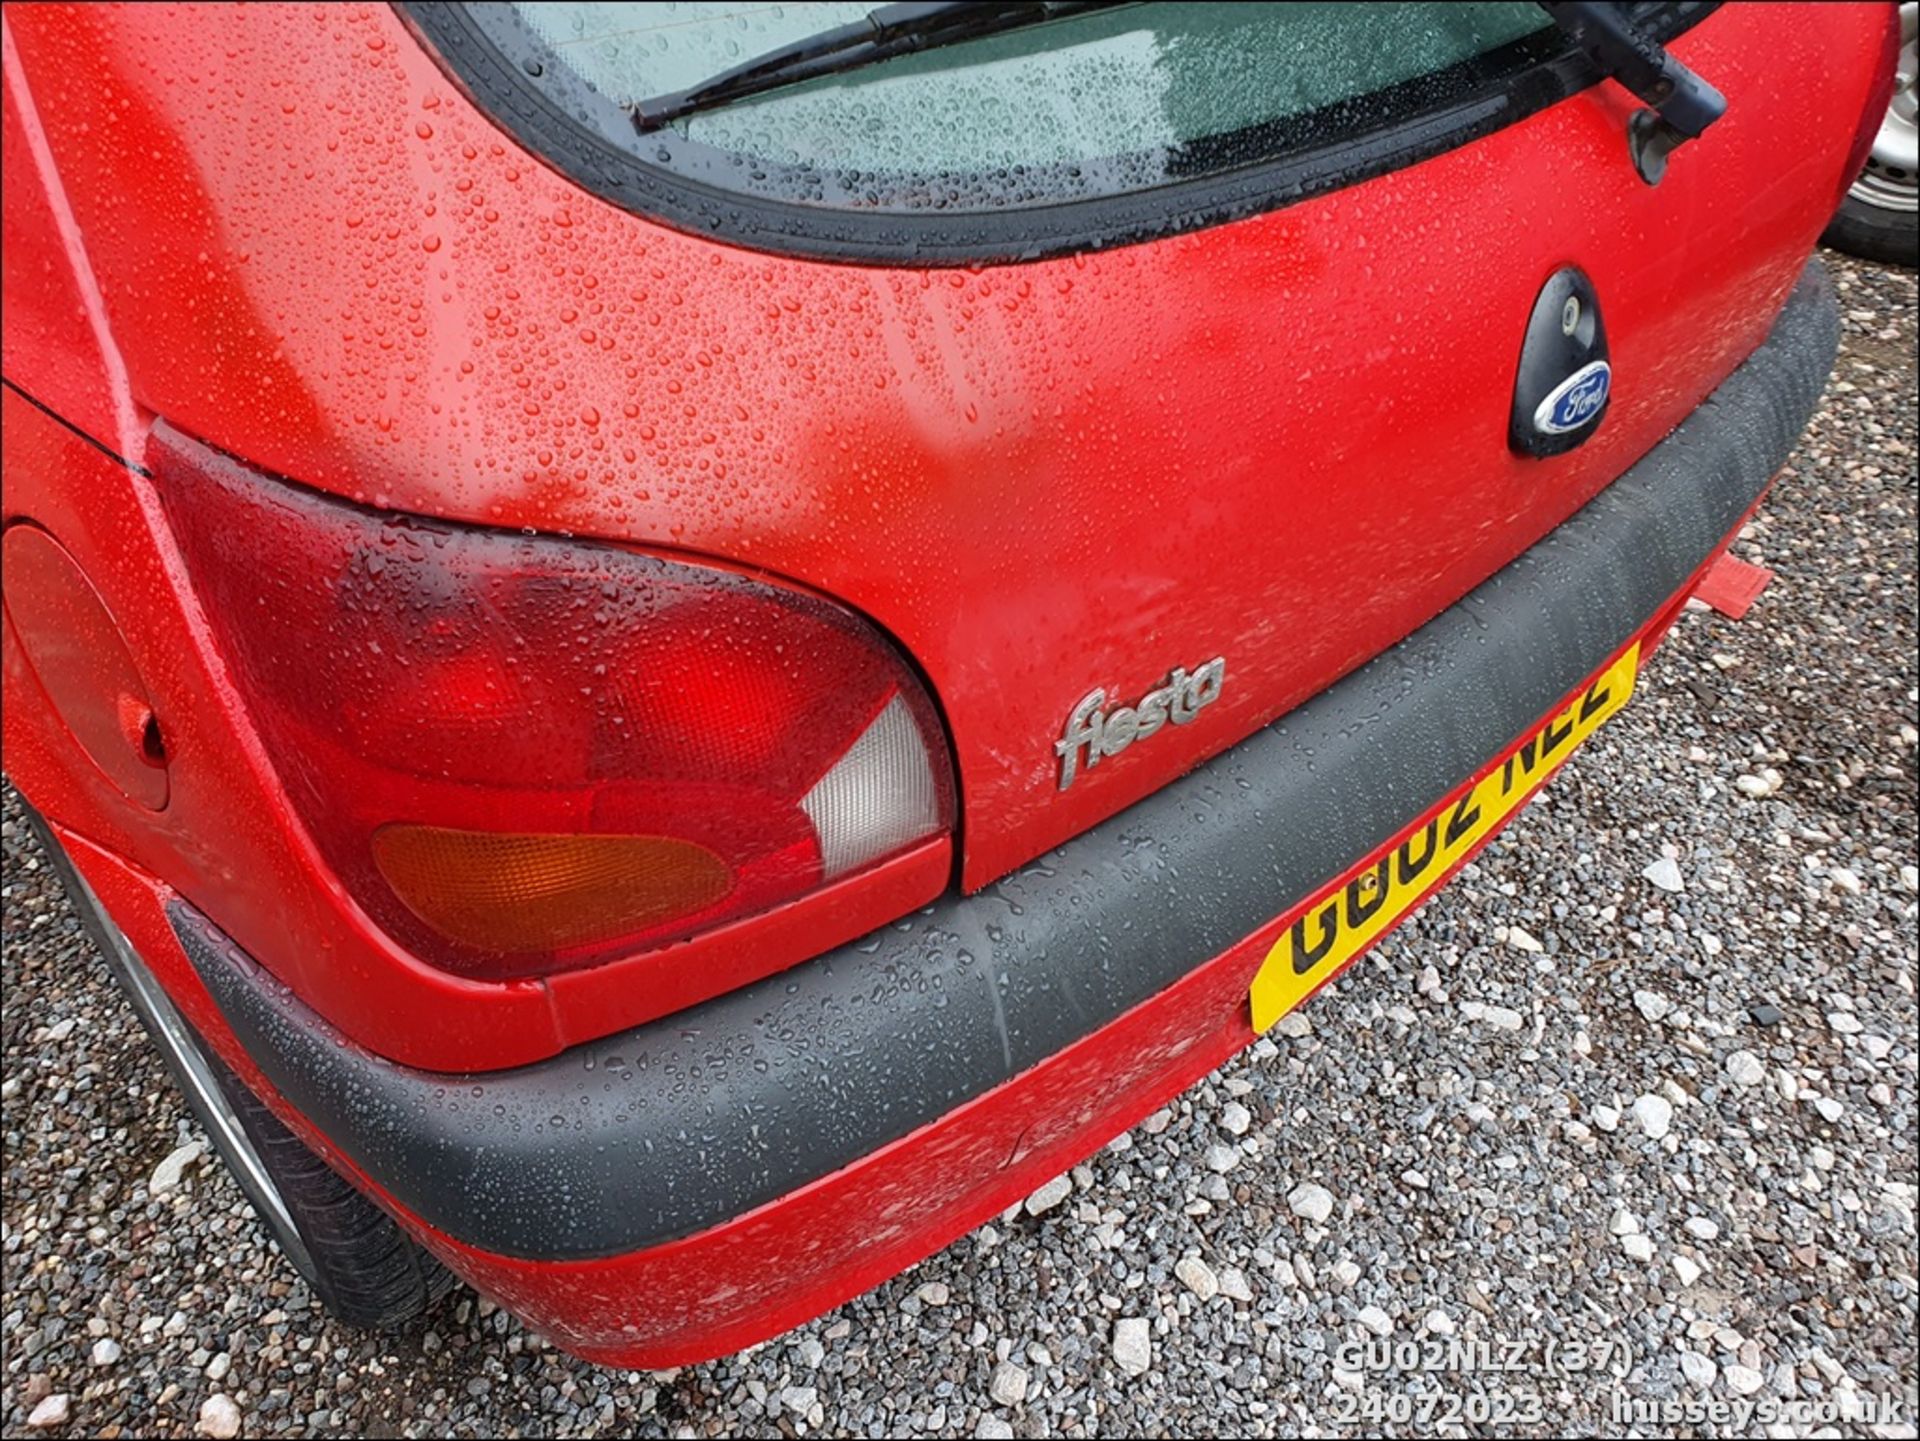 02/02 FORD FIESTA FREESTYLE - 1242cc 3dr Hatchback (Red) - Image 37 of 42